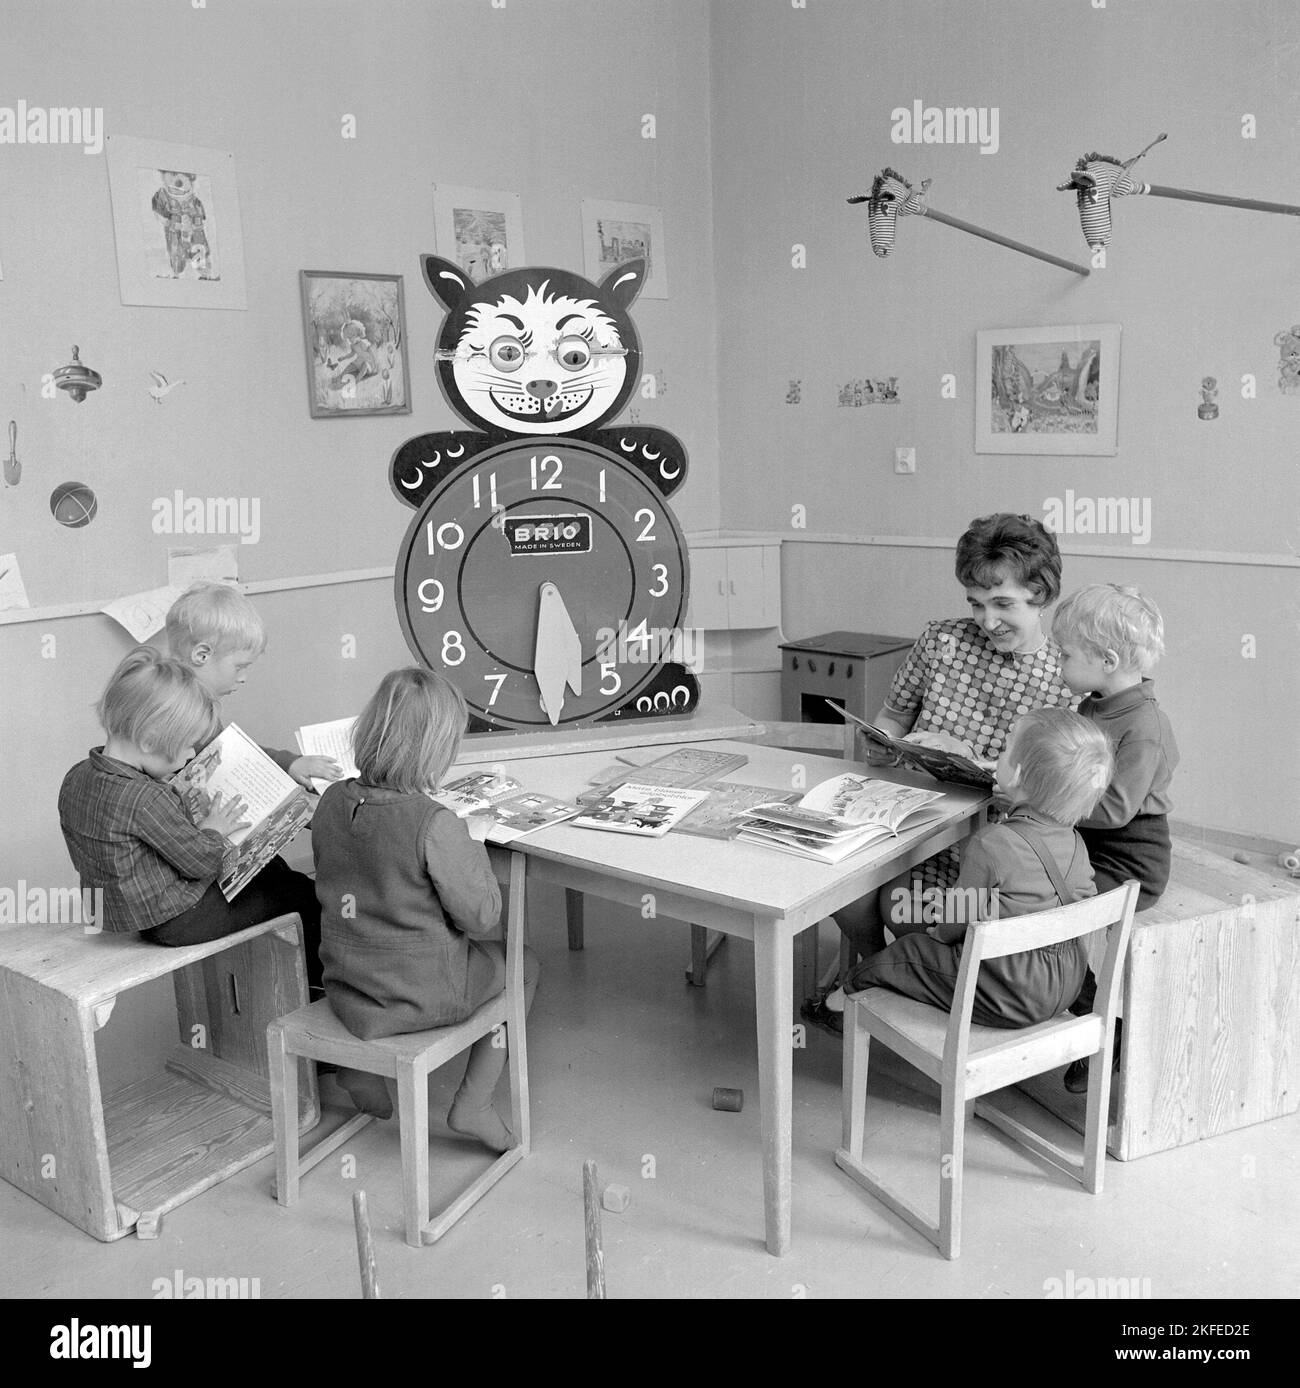 In the 1960s. The local Farsta Centrum shopping mall and area offers the parents shoppers a service of looking out for their children while doing the shopping. Pictured four children with a woman at a table reading and playing. A learning clock is visible, with extra large numbers for hours for the children to play and learn with.  Sweden 1967. Conard ref 5427 Stock Photo